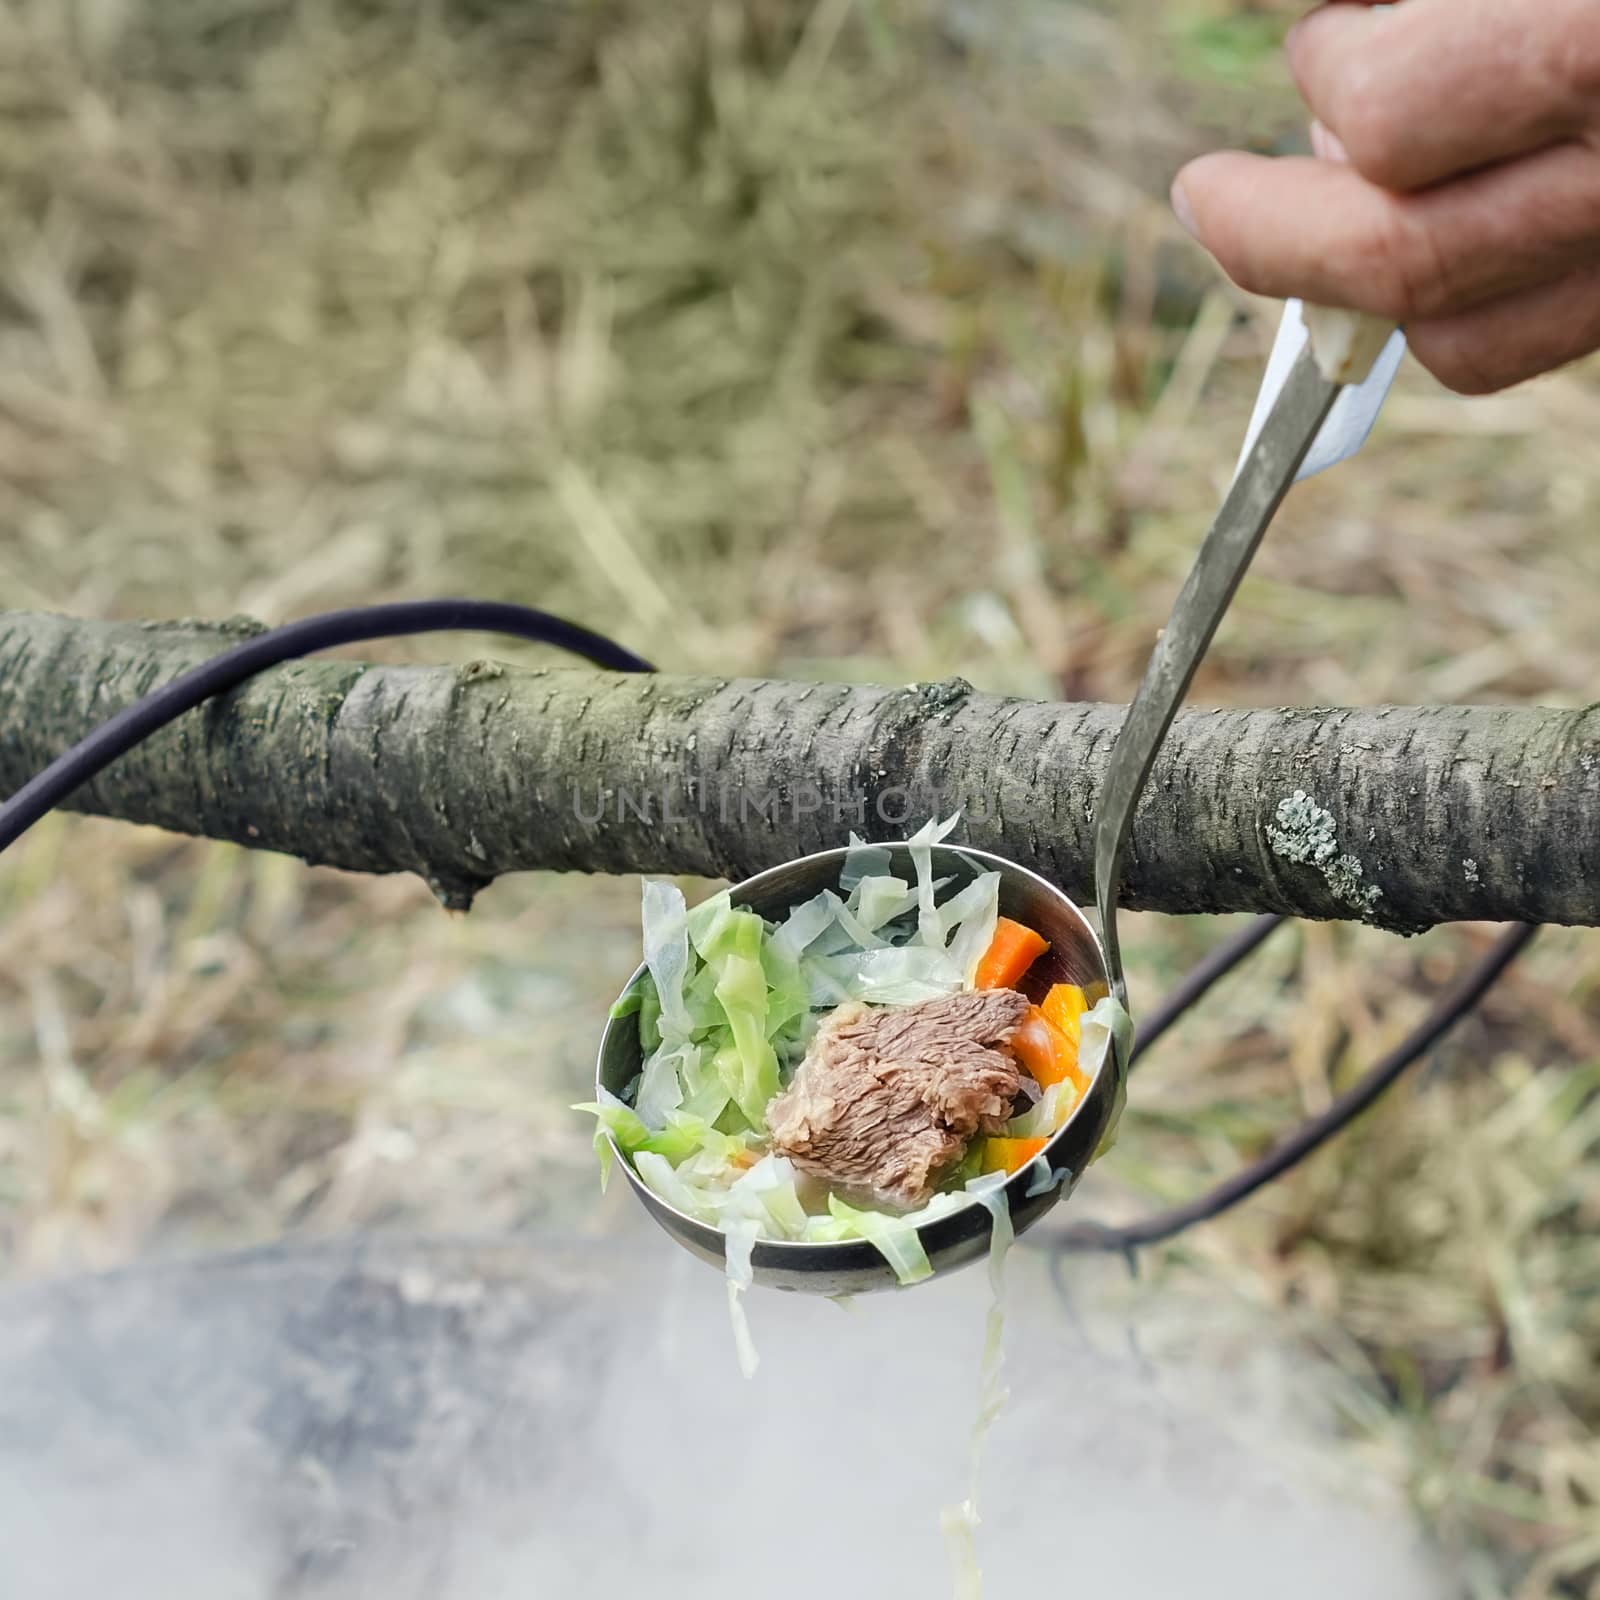 Ladle soup with meat and vegetables over a steaming pot on the picnic